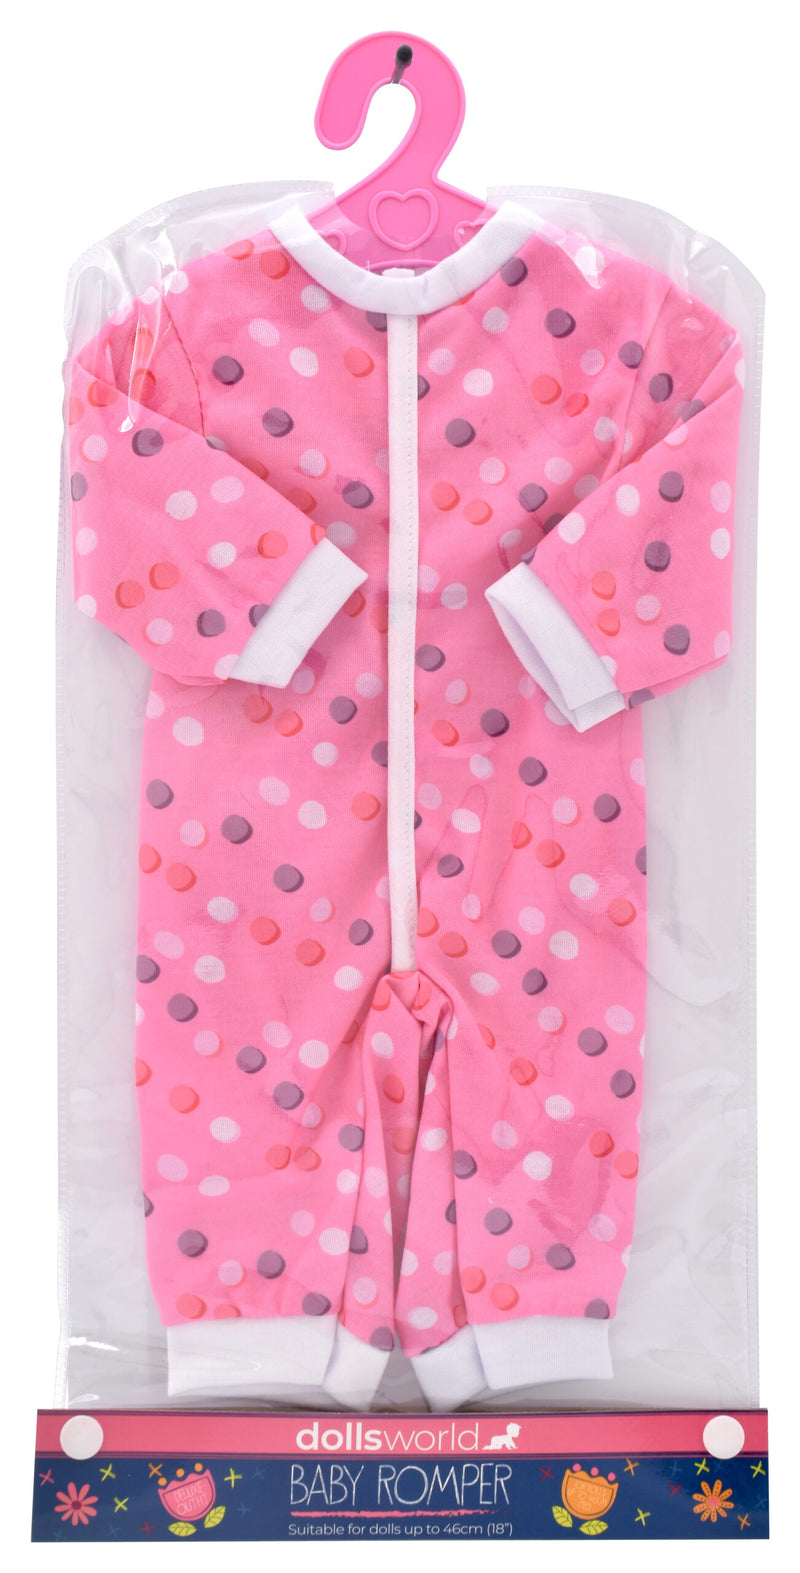 Dollsworld Baby Dolls Clothes - Polka Dot Onesie Outfit (7769733431451)